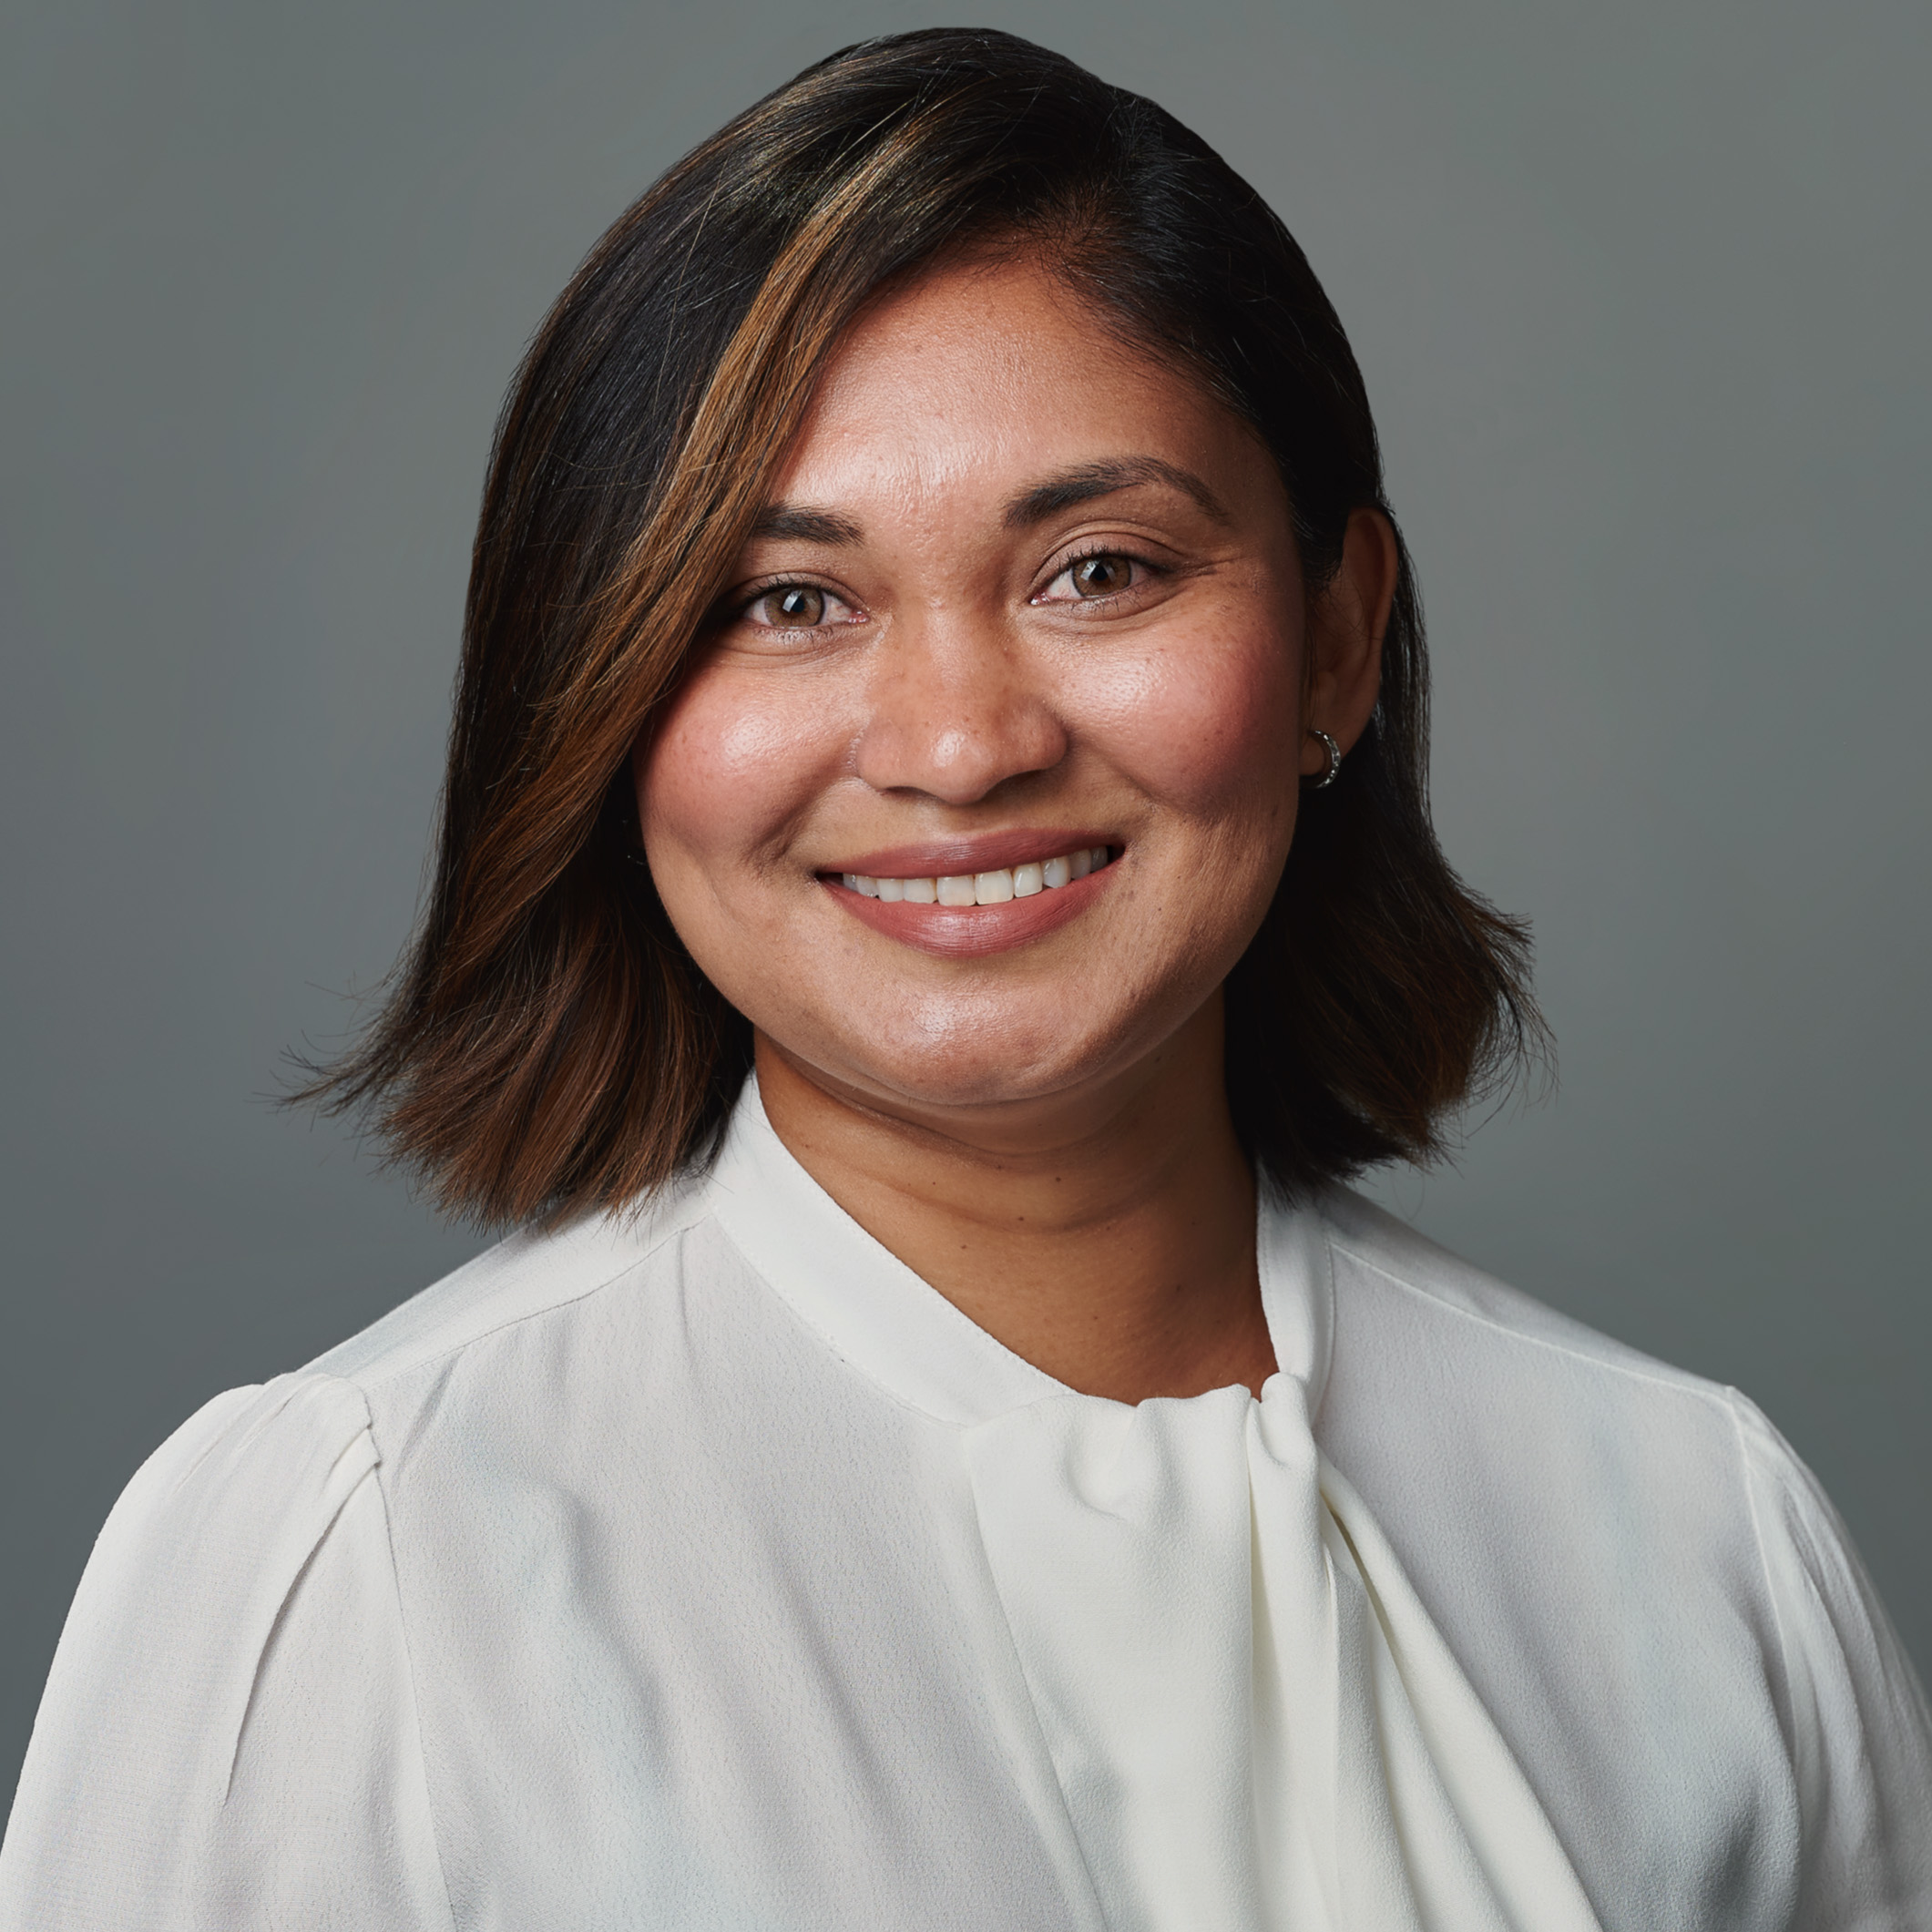 Photo with dark grey background. Woman of South-East Asian descent smiling, with shoulder length brown hair swept to one side and wearing a plain white shirt.